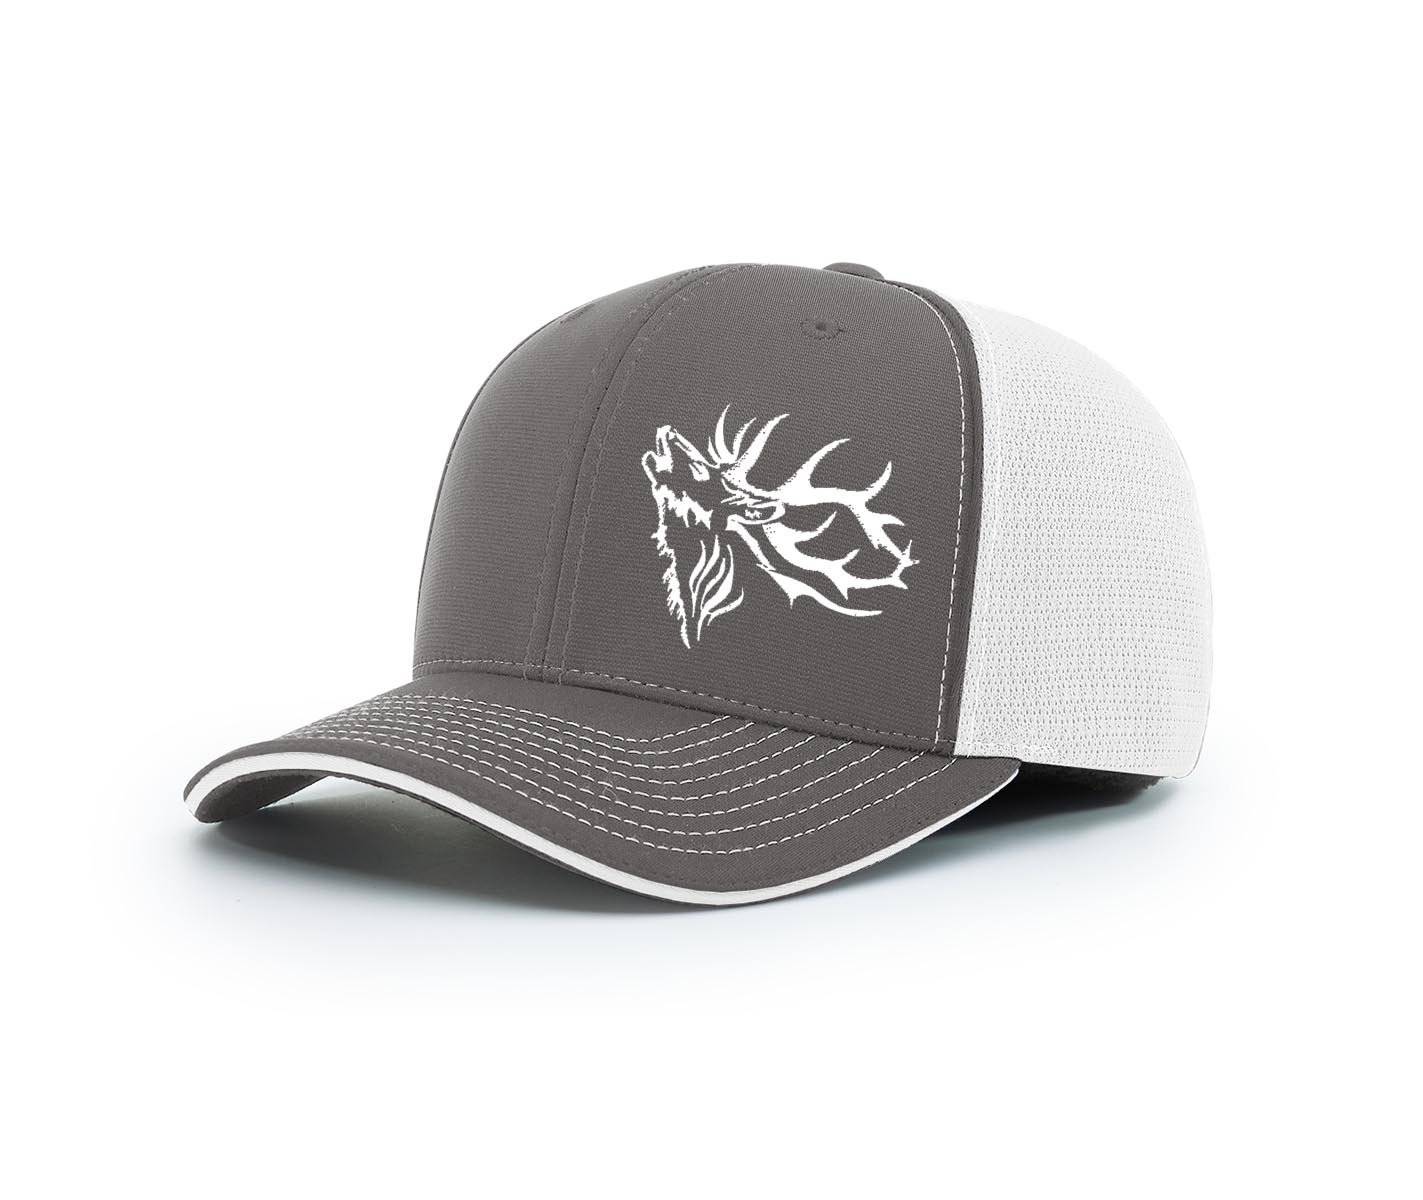 Swamp Cracker – Tagged hat – Swamp Cracker Outdoor Apparel